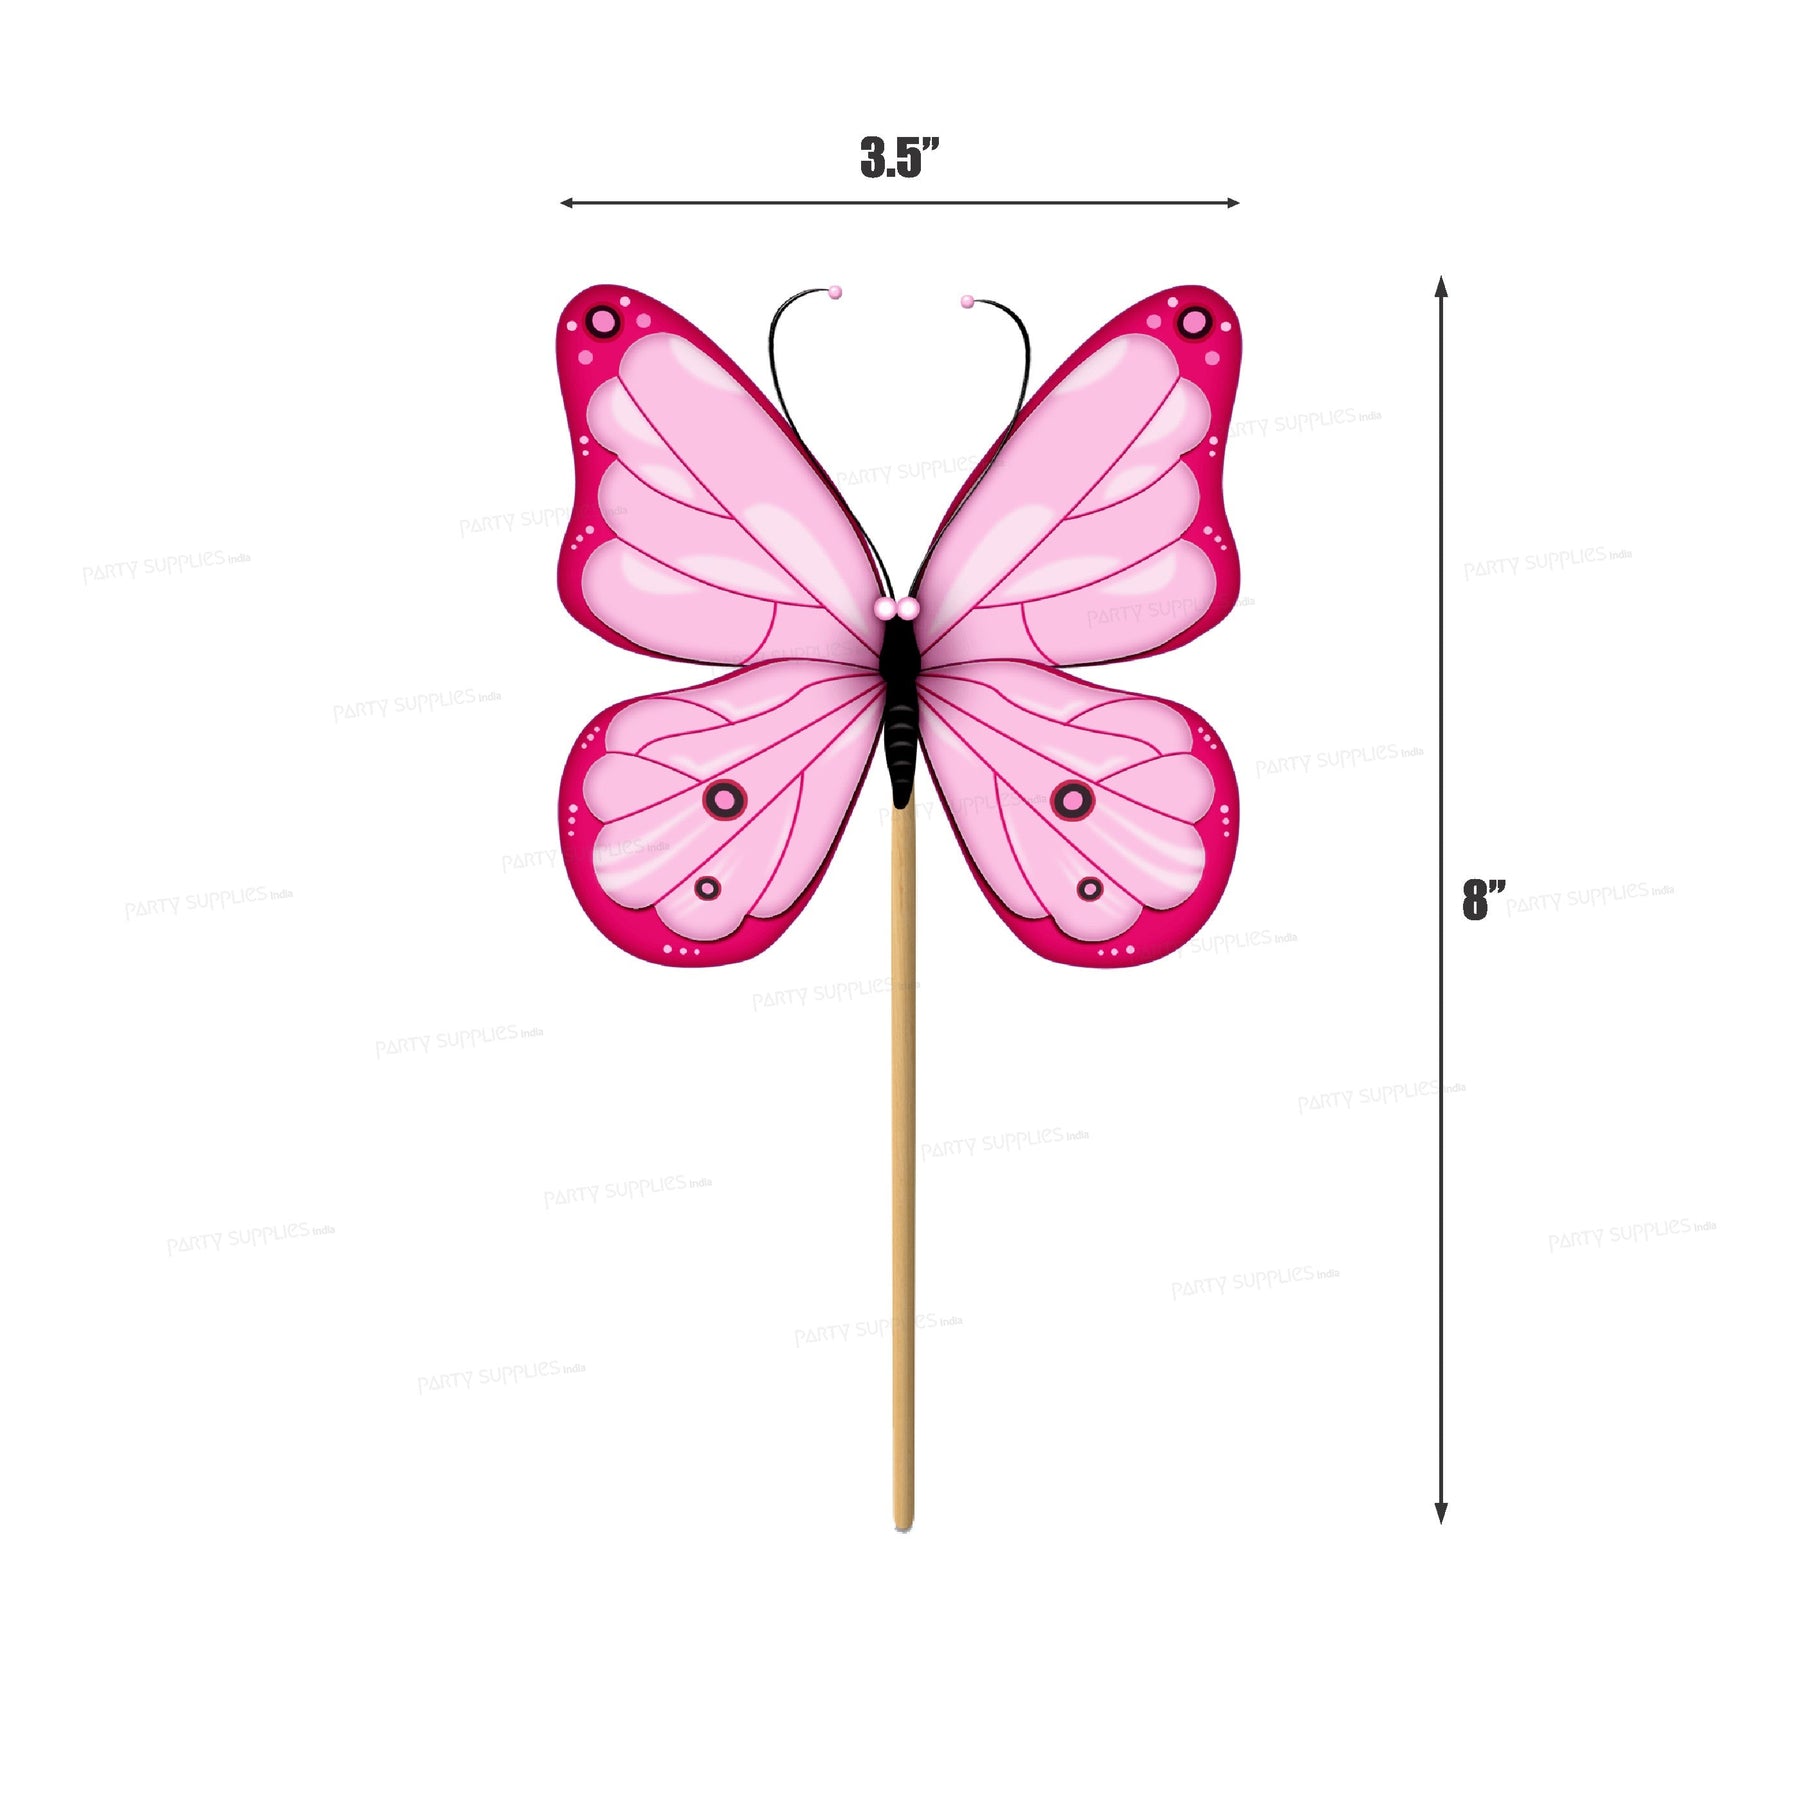 PSI Butterfly Theme Cup Cake Topper